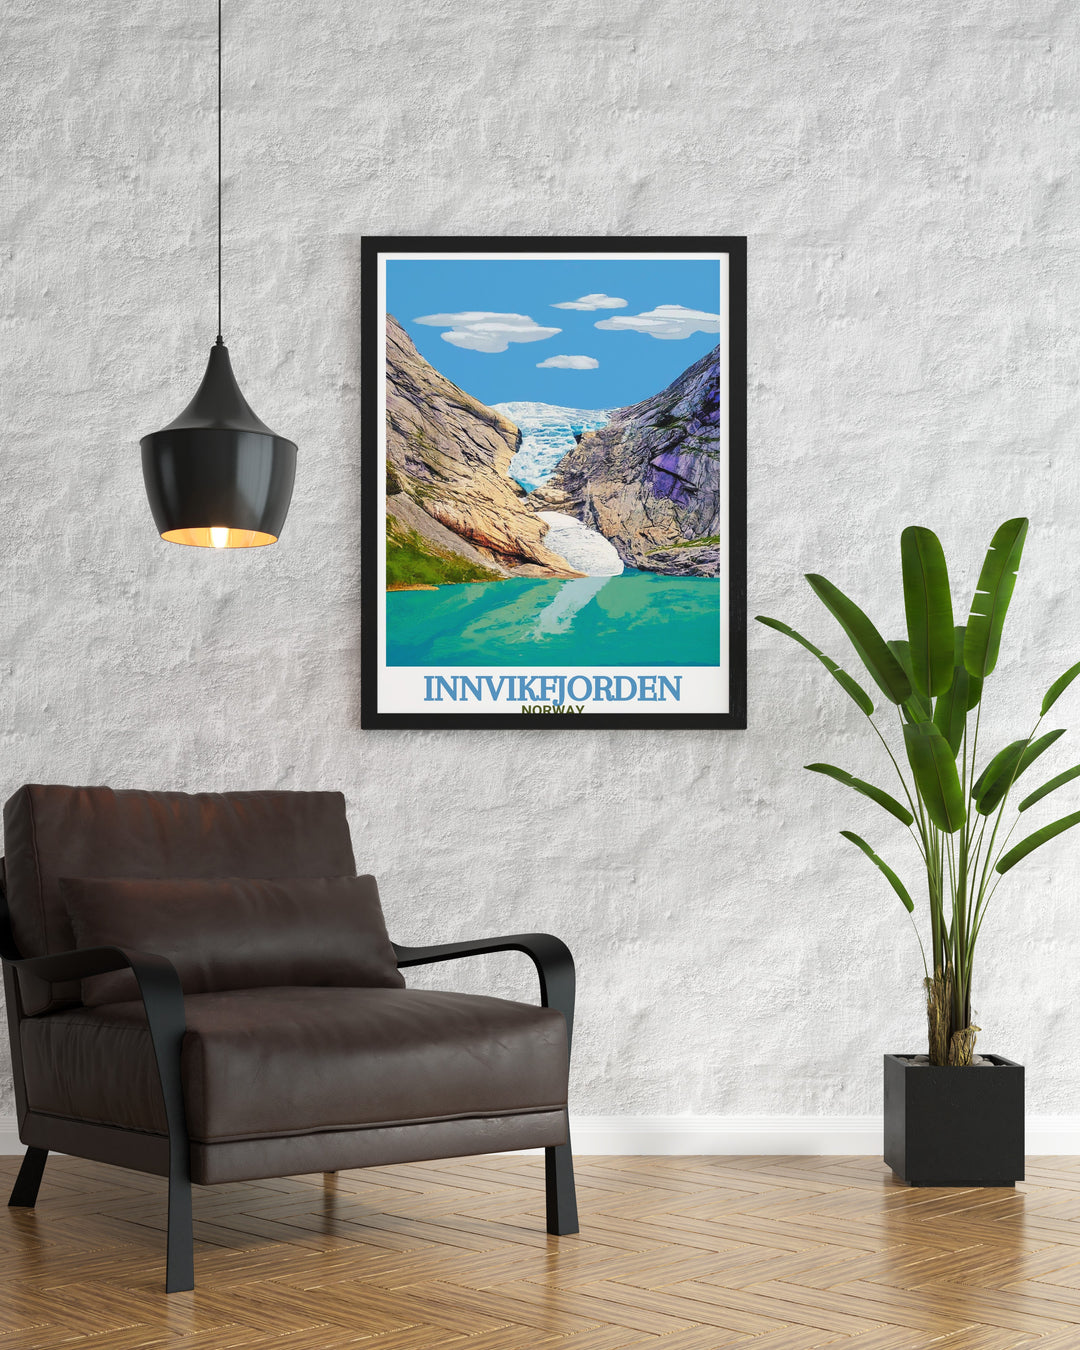 Breathtaking Briksdalsbreen Glacier prints highlighting the fjord beauty and serene Nordic scenery of Innvikfjorden Norway perfect for art lovers